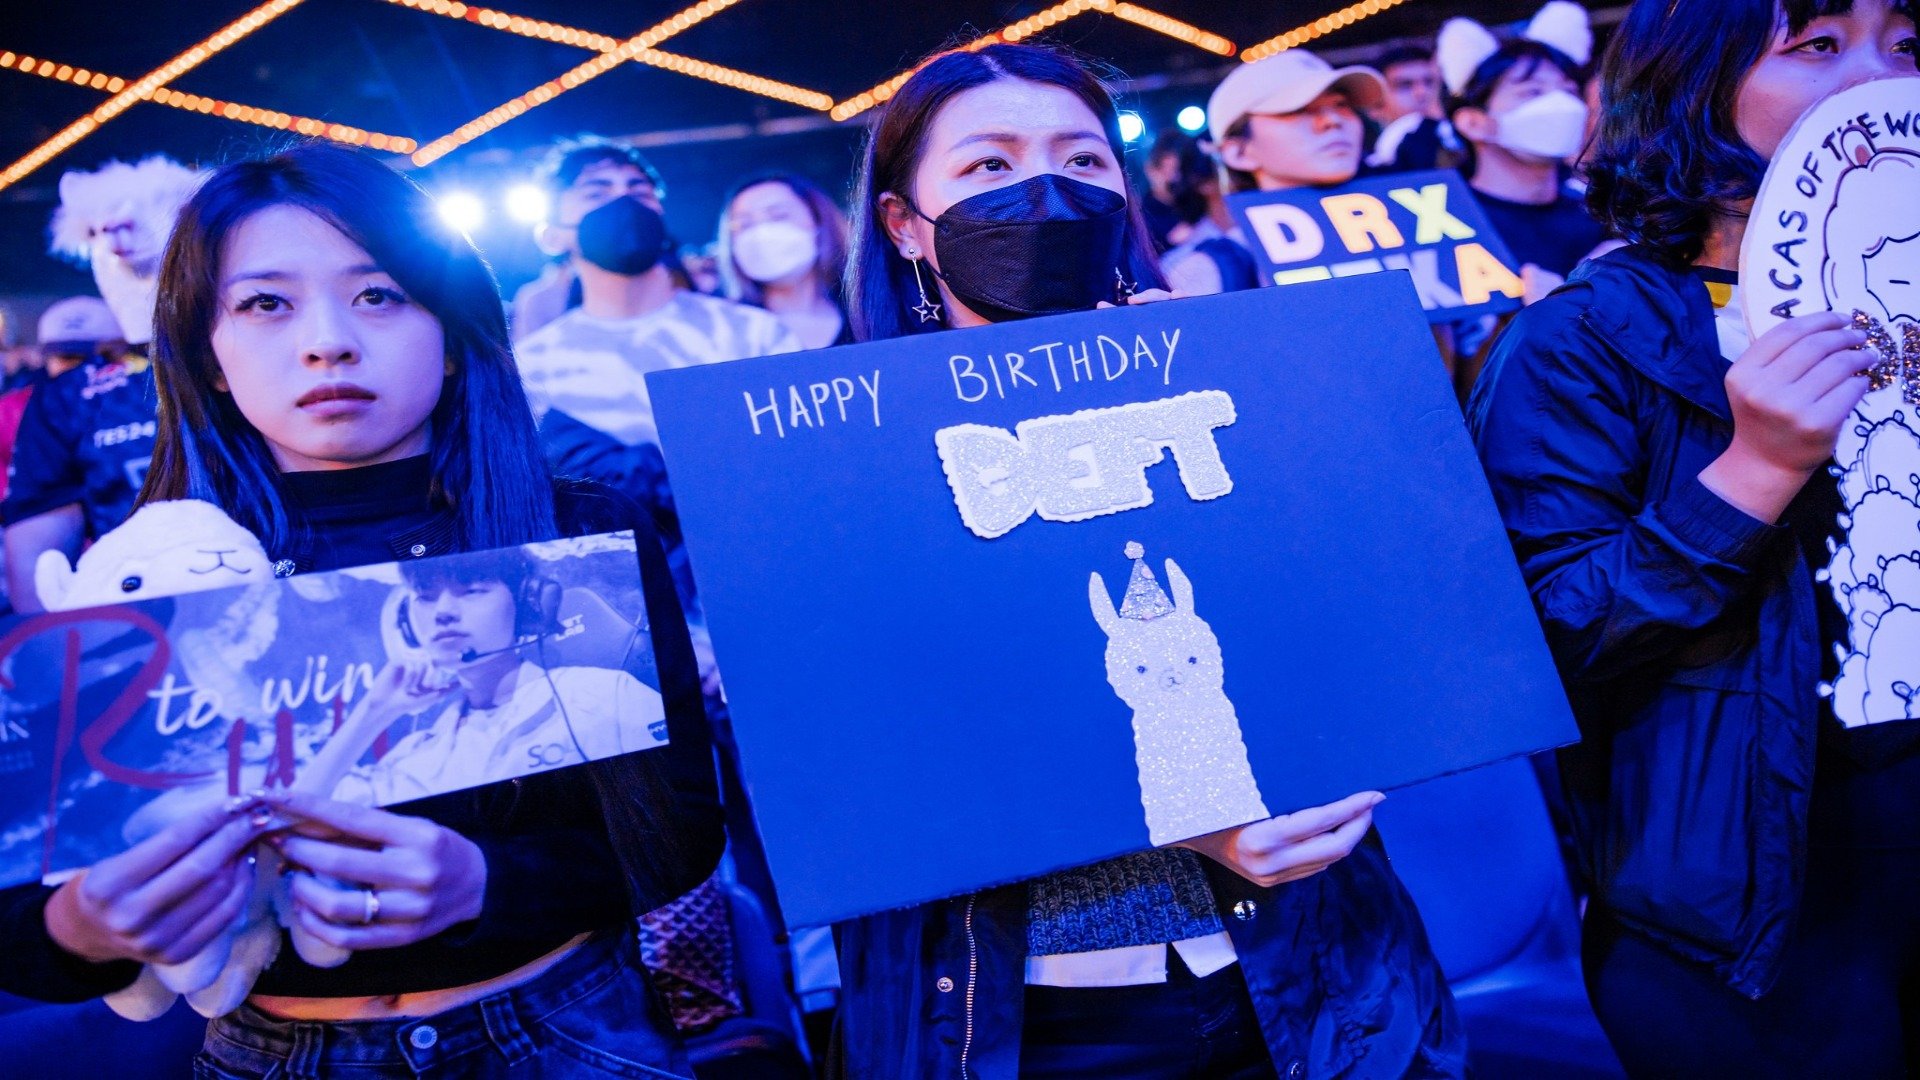 Fans cheering for DRX and Deft during the Worlds Quarterfinals